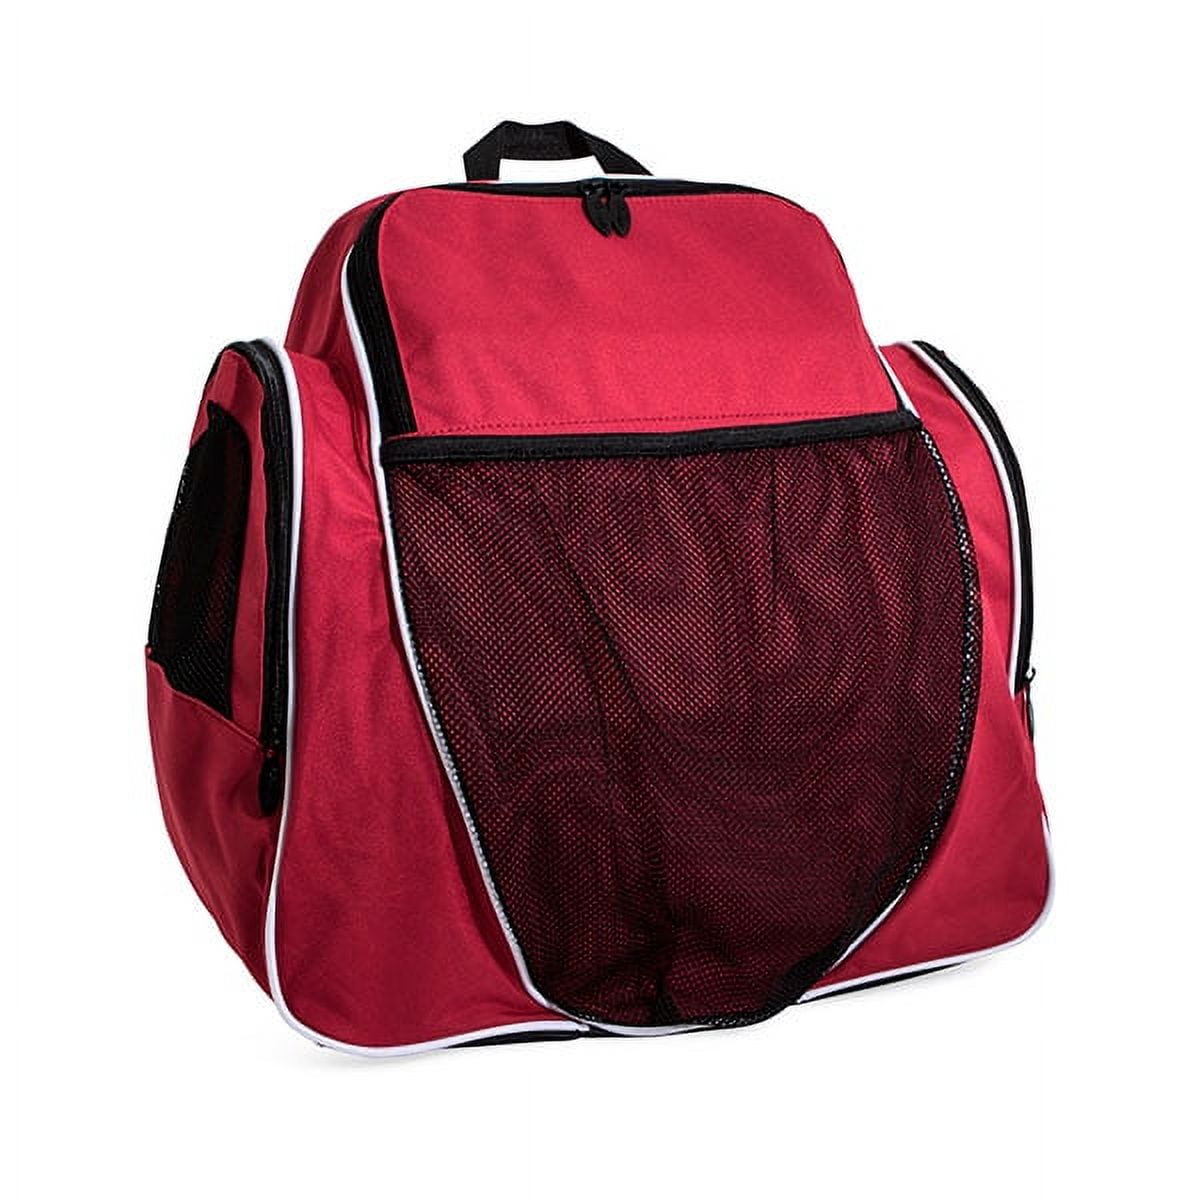 18 X 19 X 10 In. Deluxe All Purpose Backpack, Red